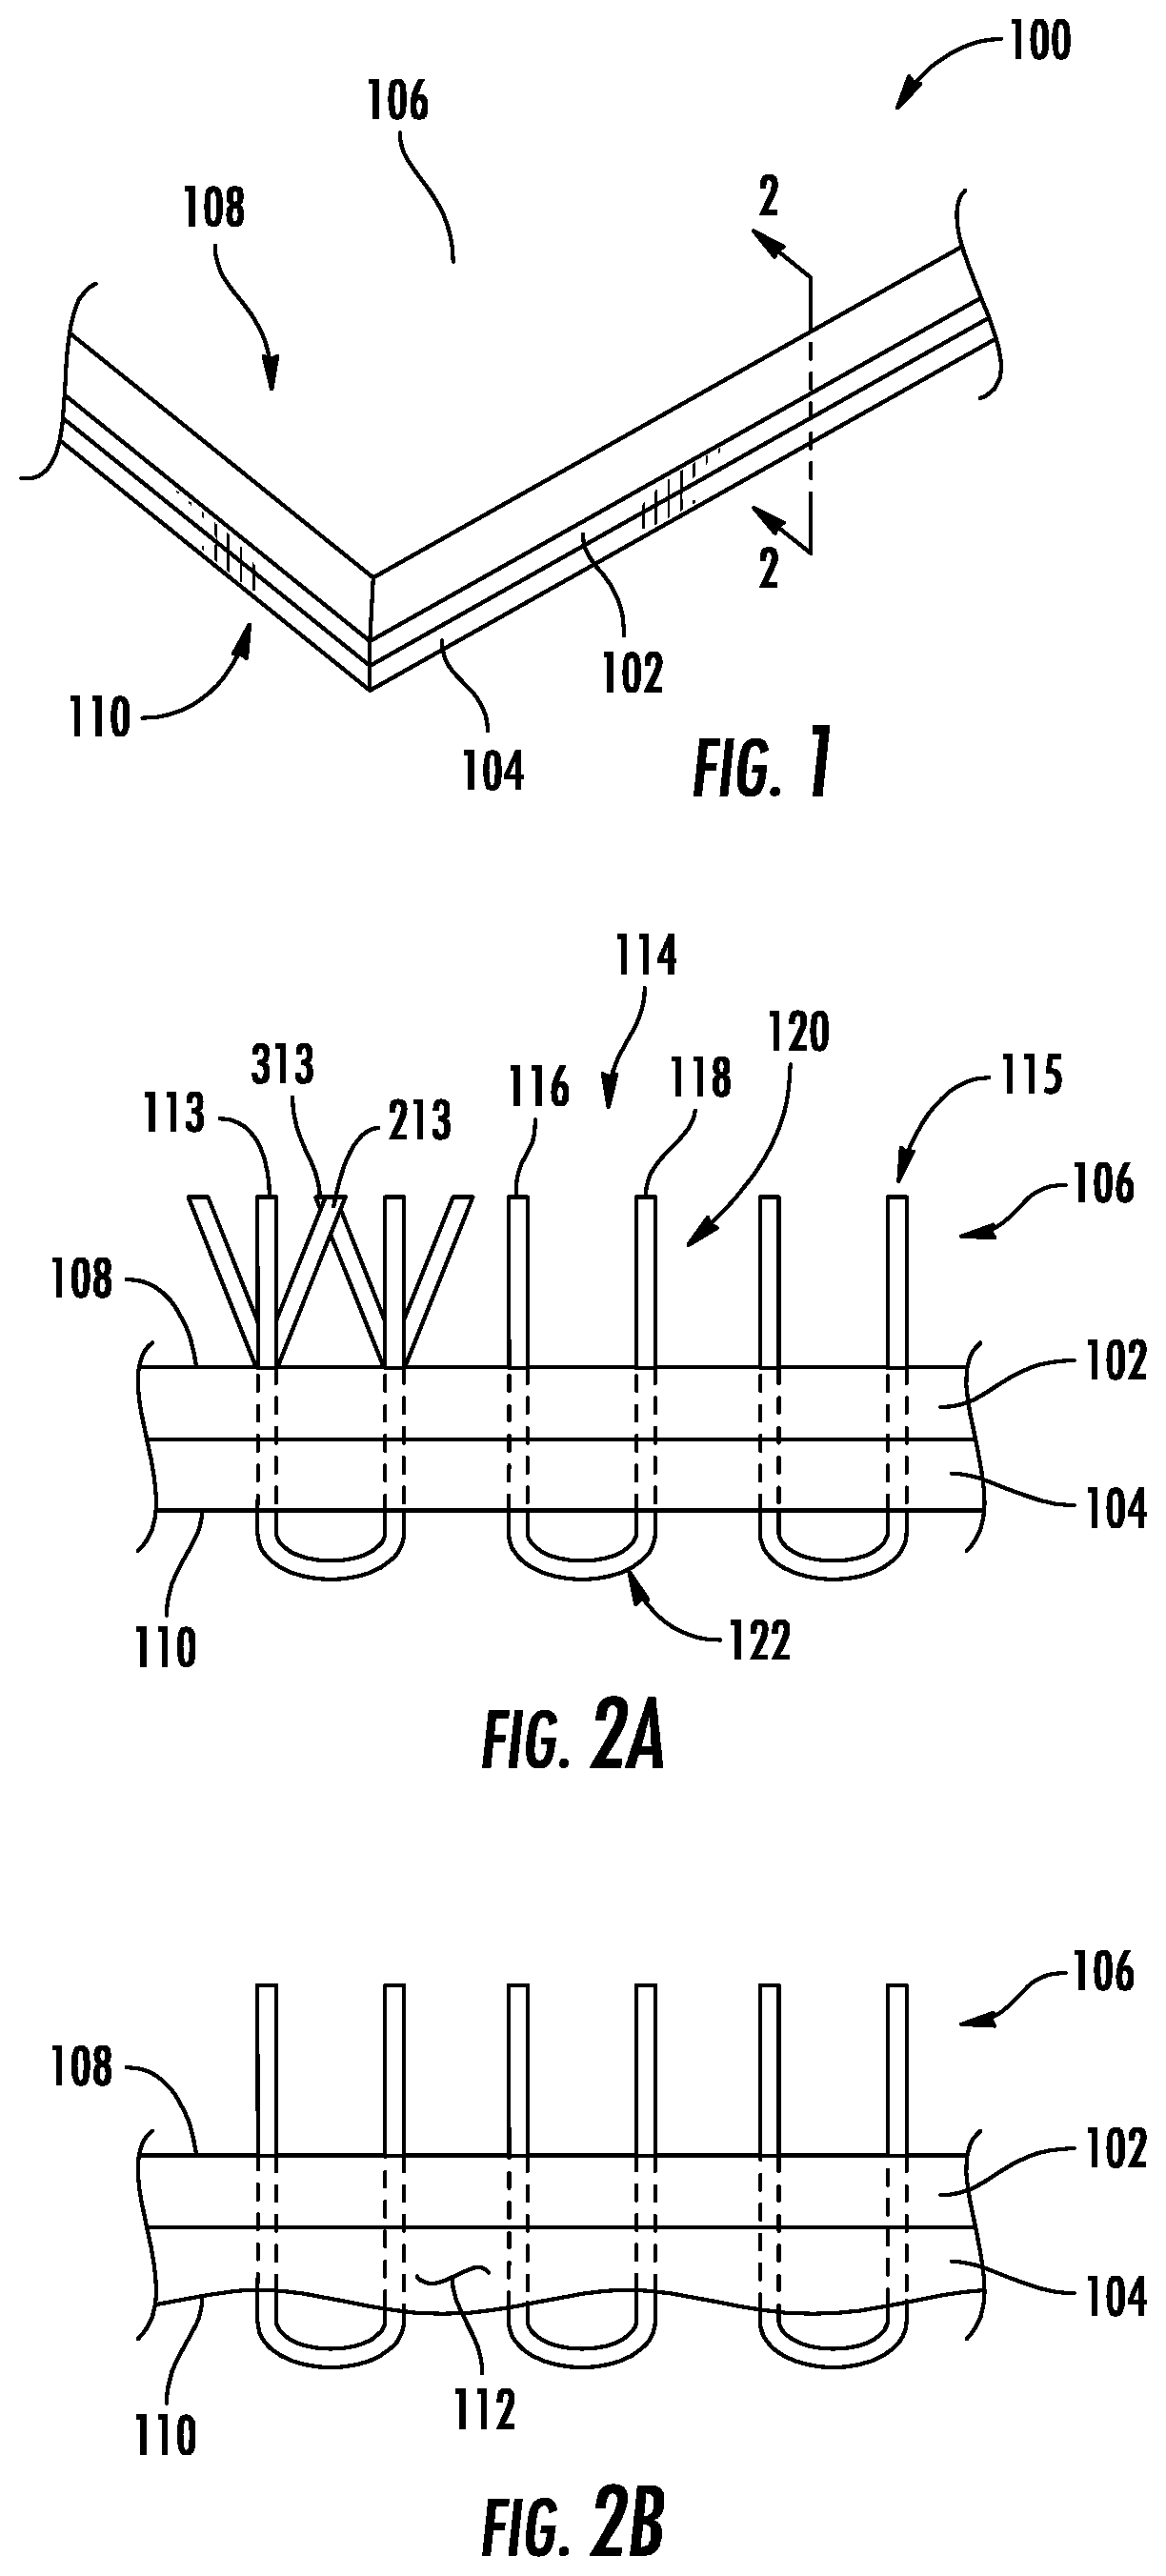 Pile fabrics and systems and methods for forming pile fabrics